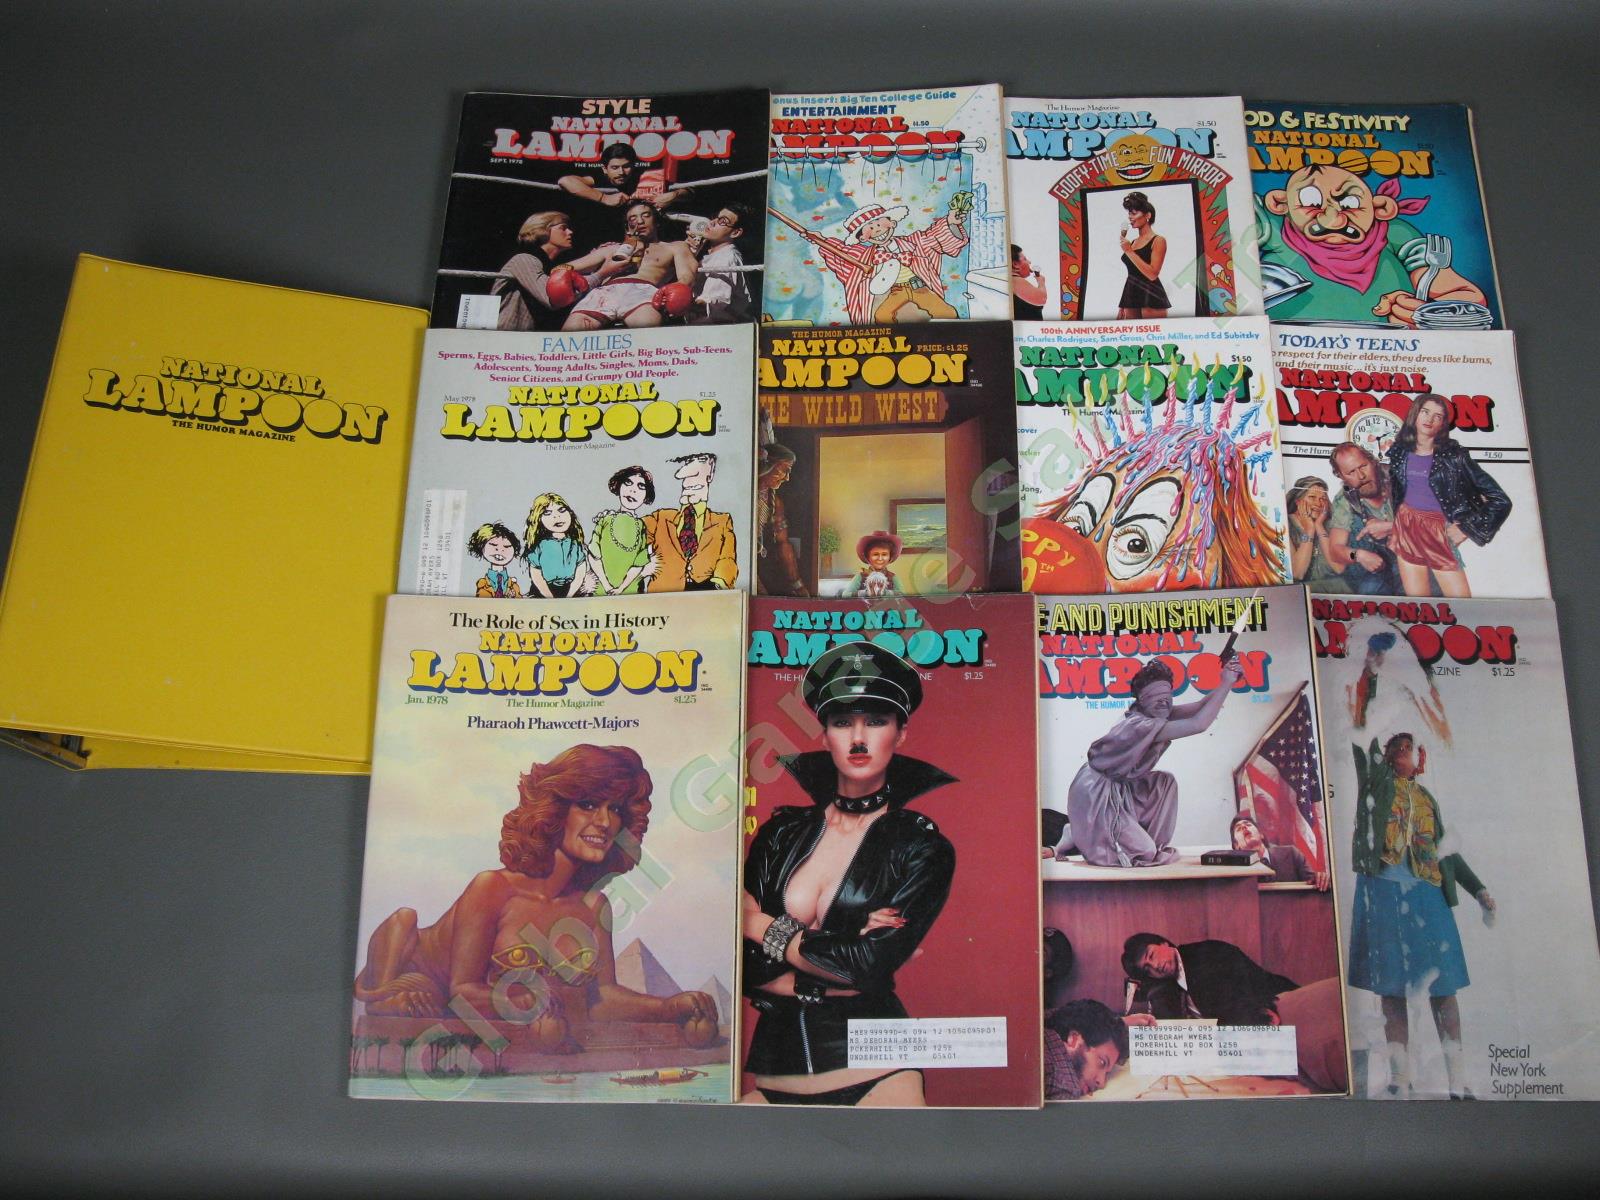 COMPLETE Vintage 1978 National Lampoon Humor Magazine 12 Issue Set Collection NR